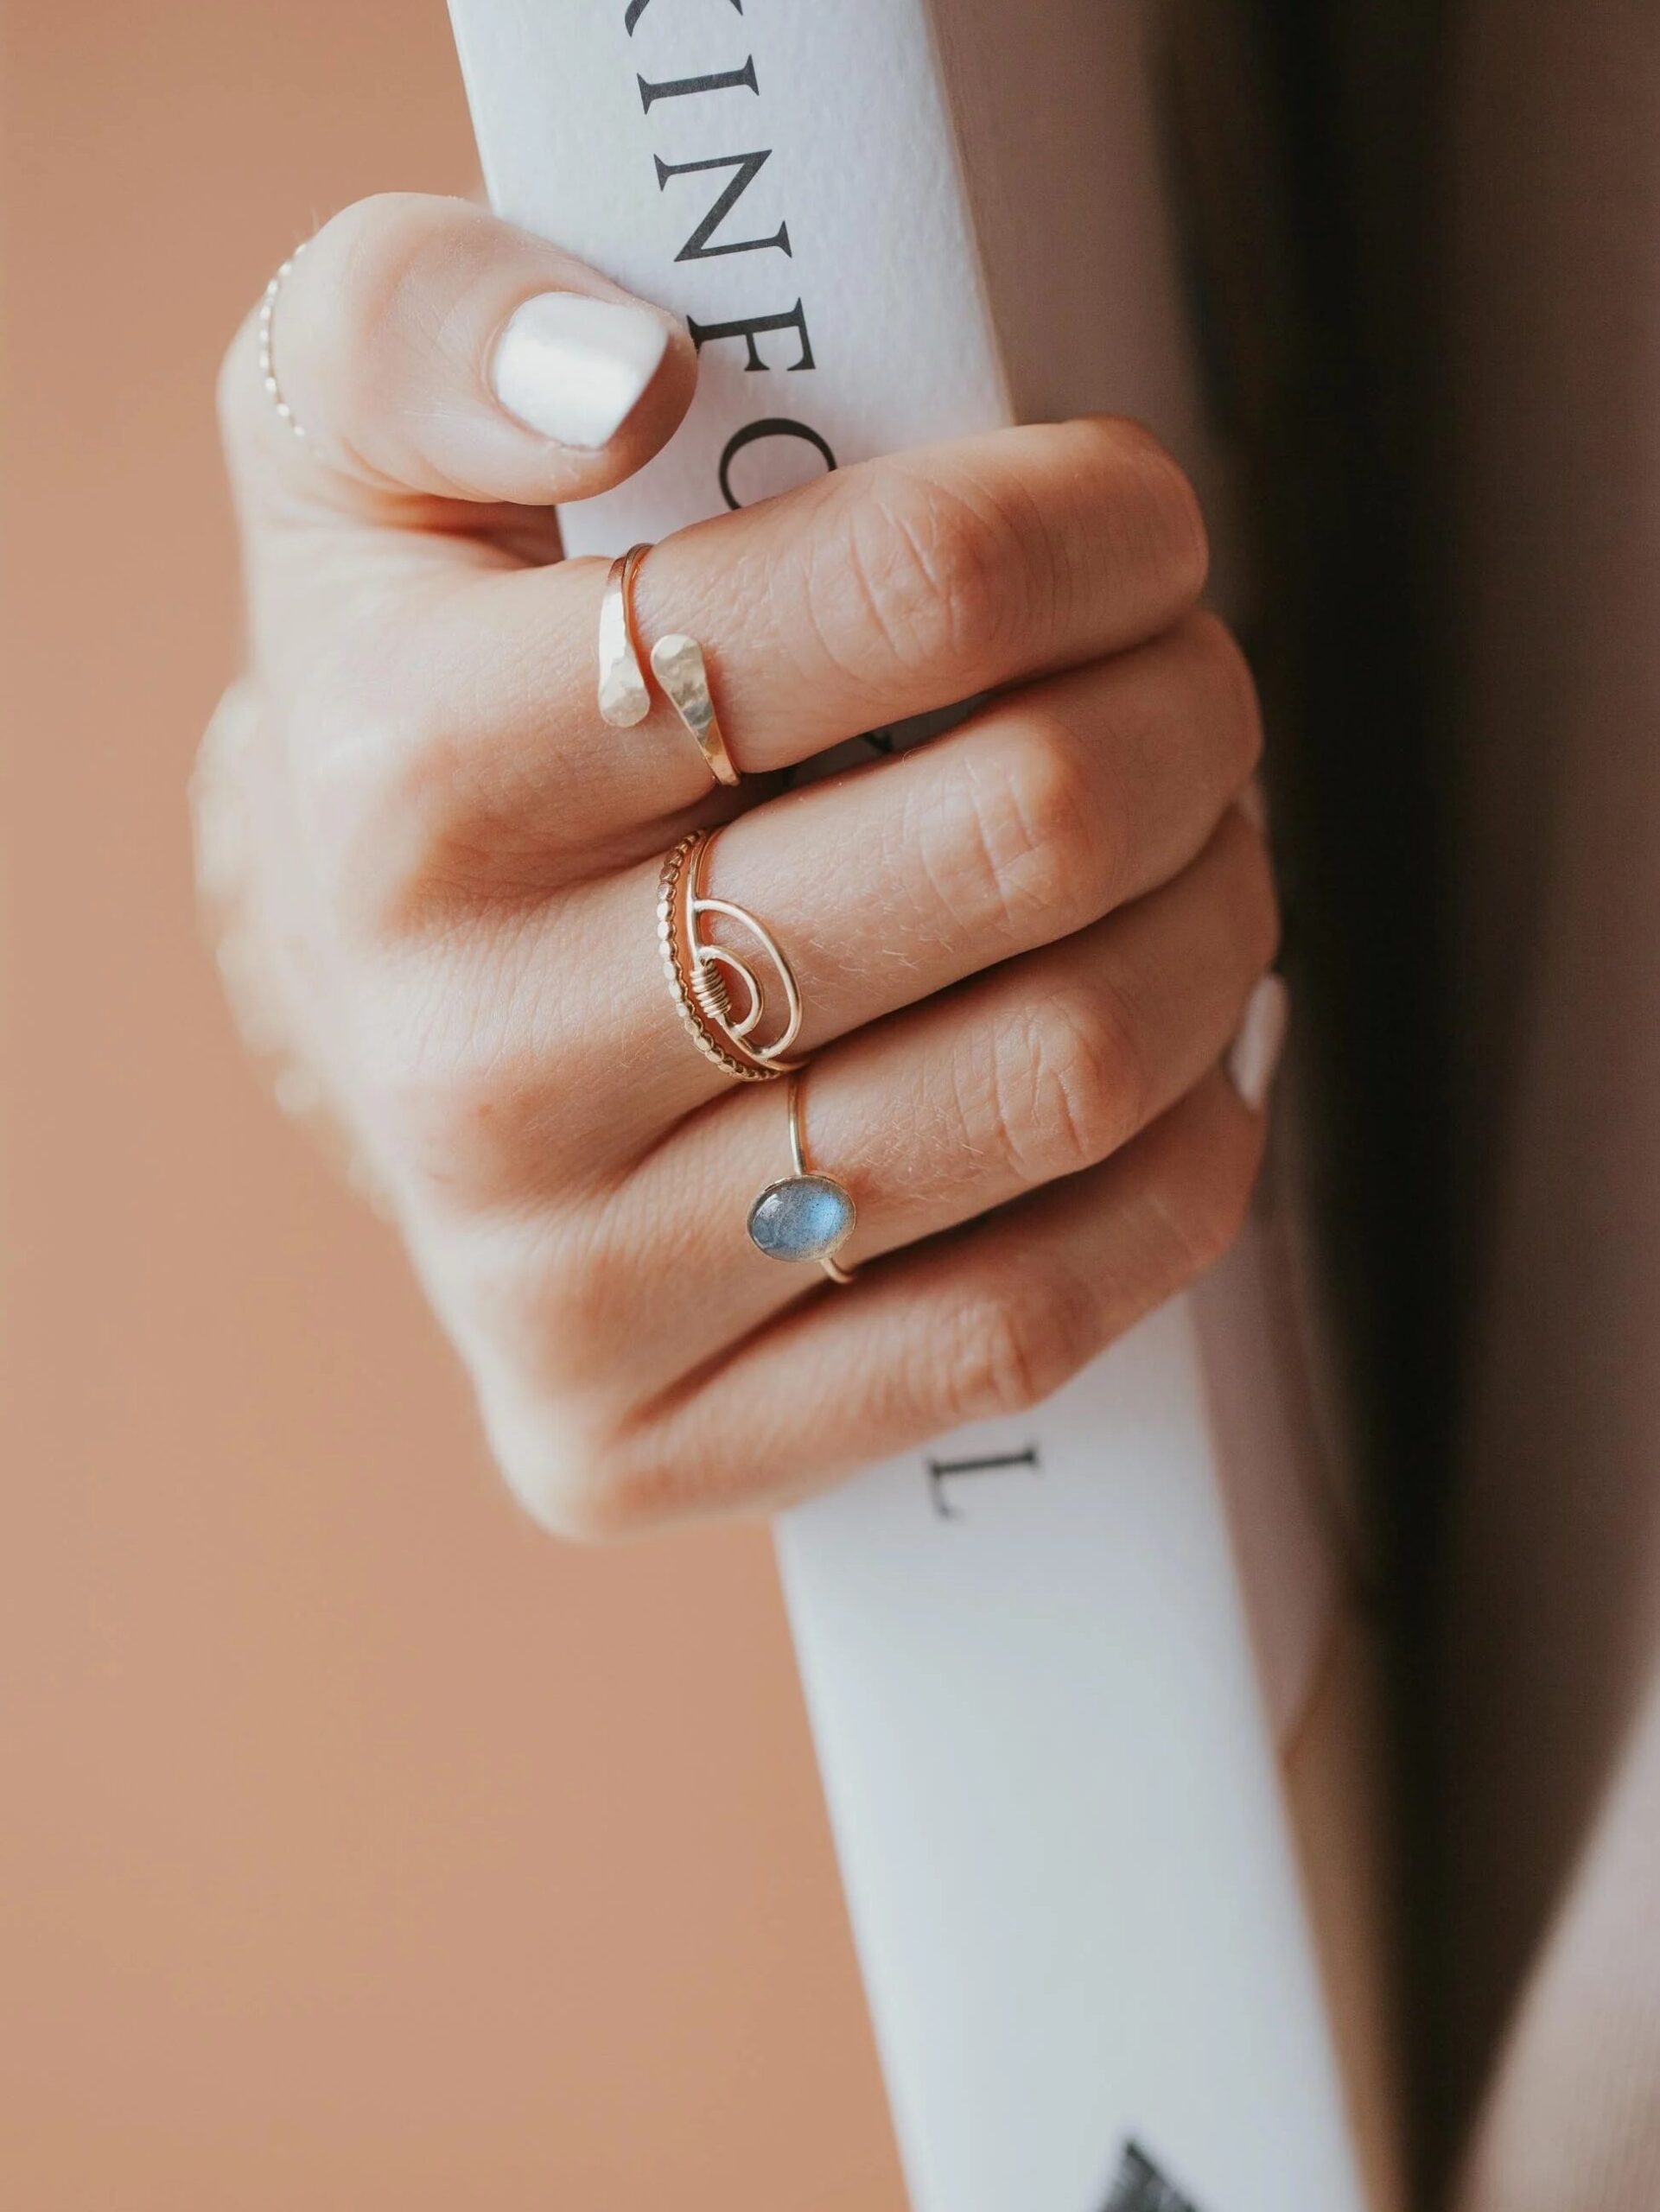 A person holding a book with their hand adorned with three elegant rings, including a gemstone ring.